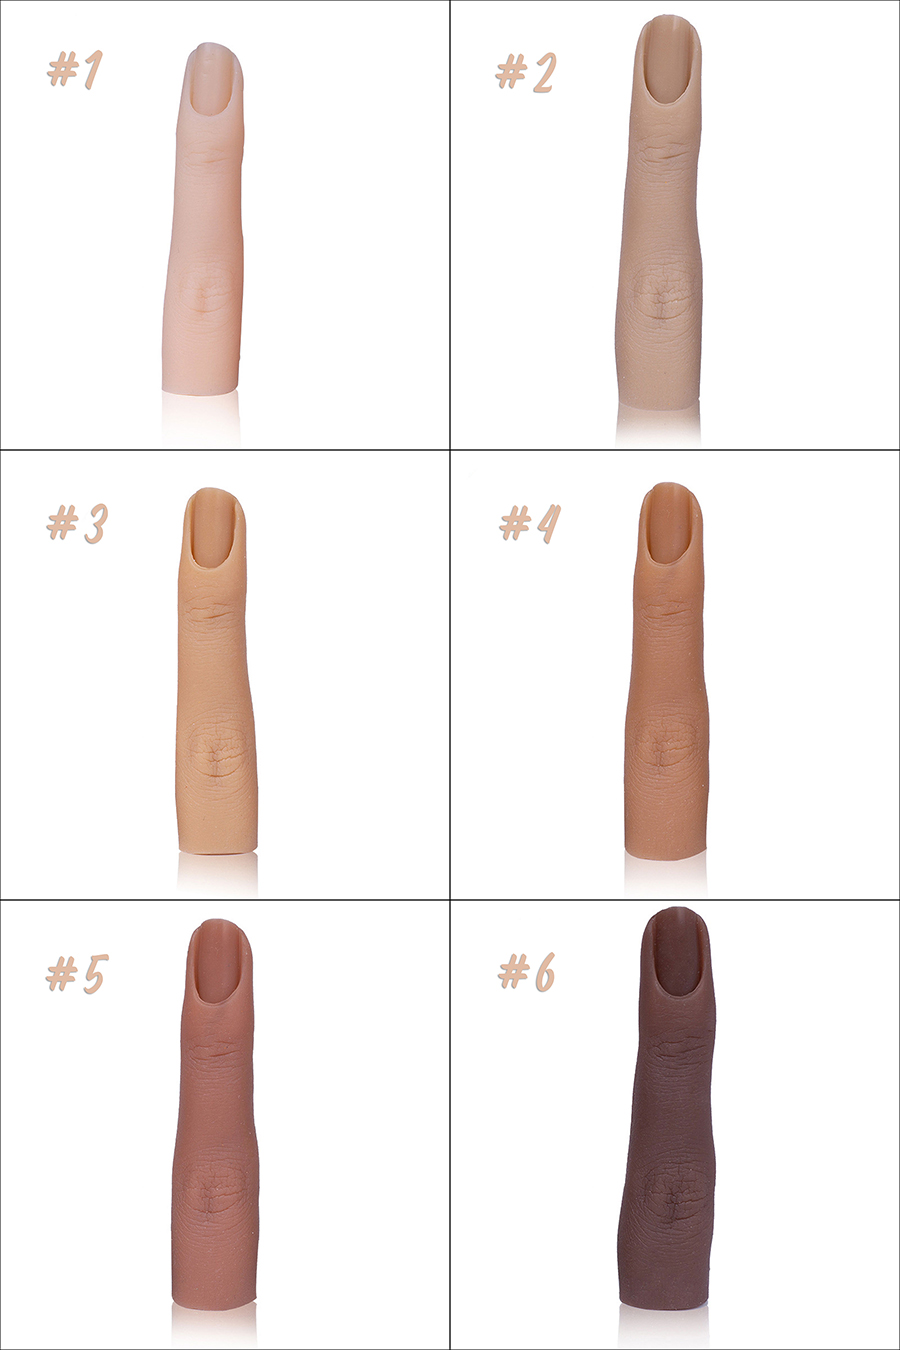 rnt-793 nail silicone practice fingers